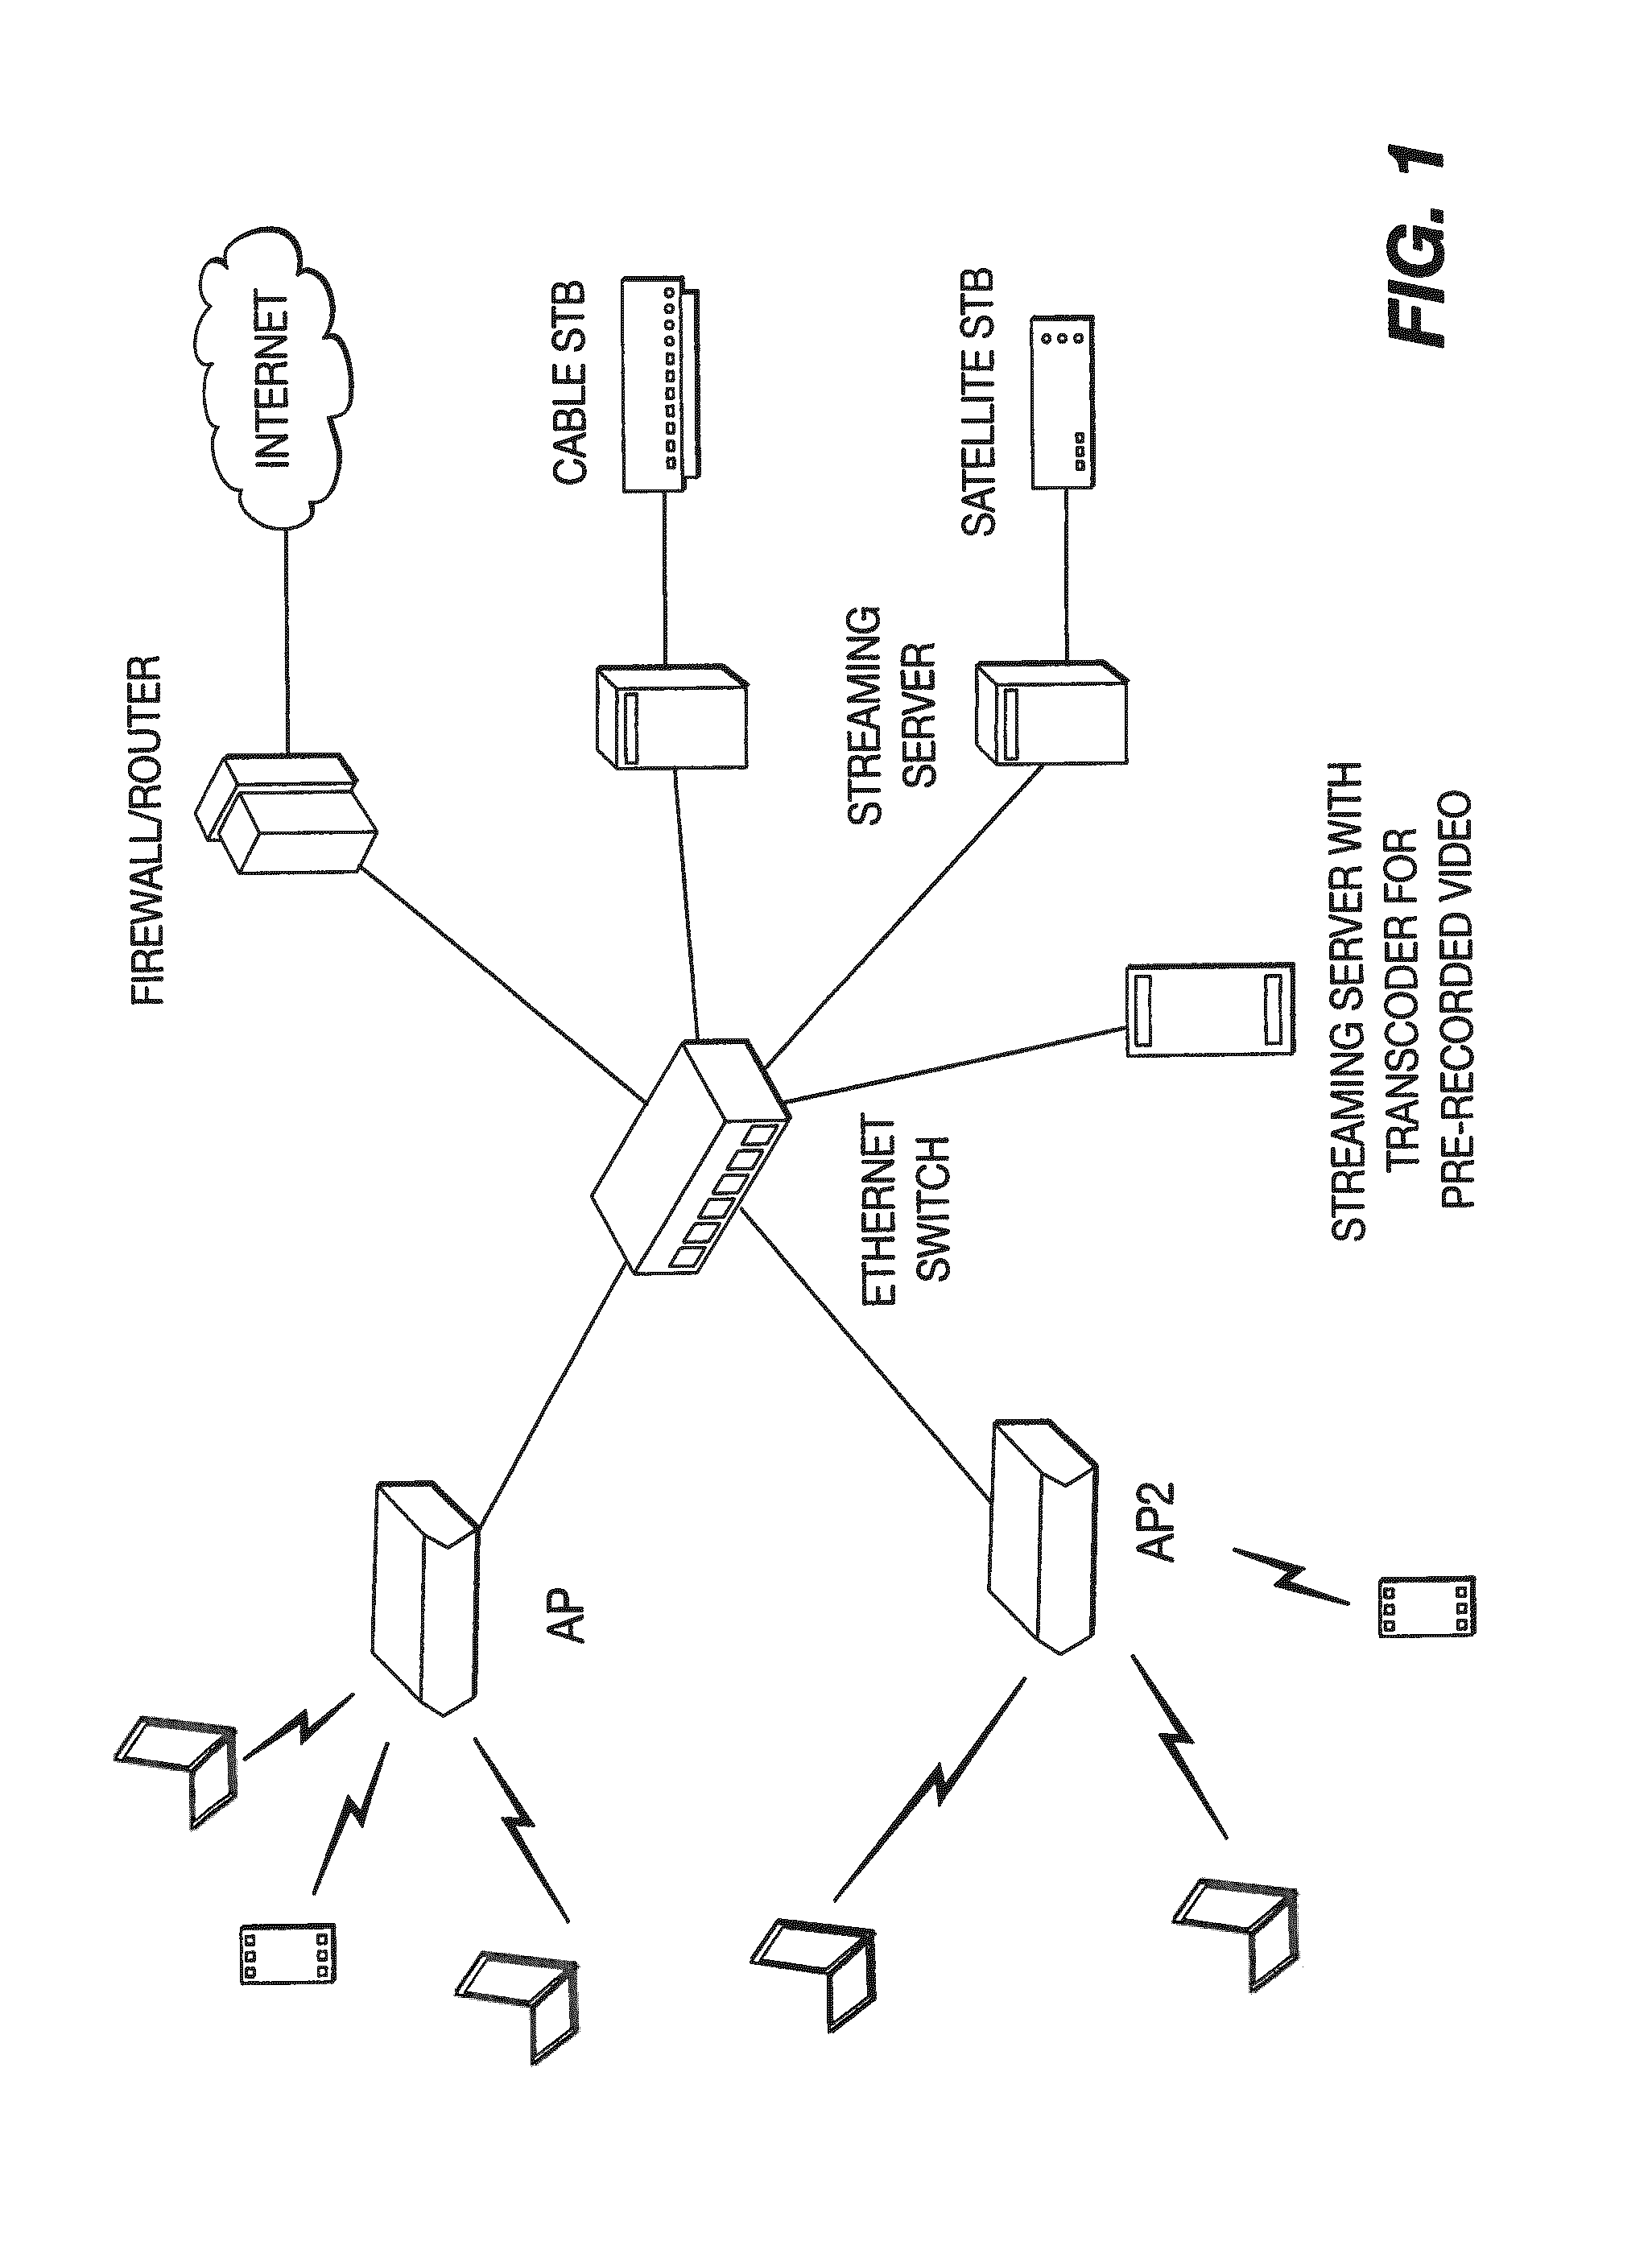 Adaptive joint source and channel coding scheme for H.264 video multicasting over wireless networks